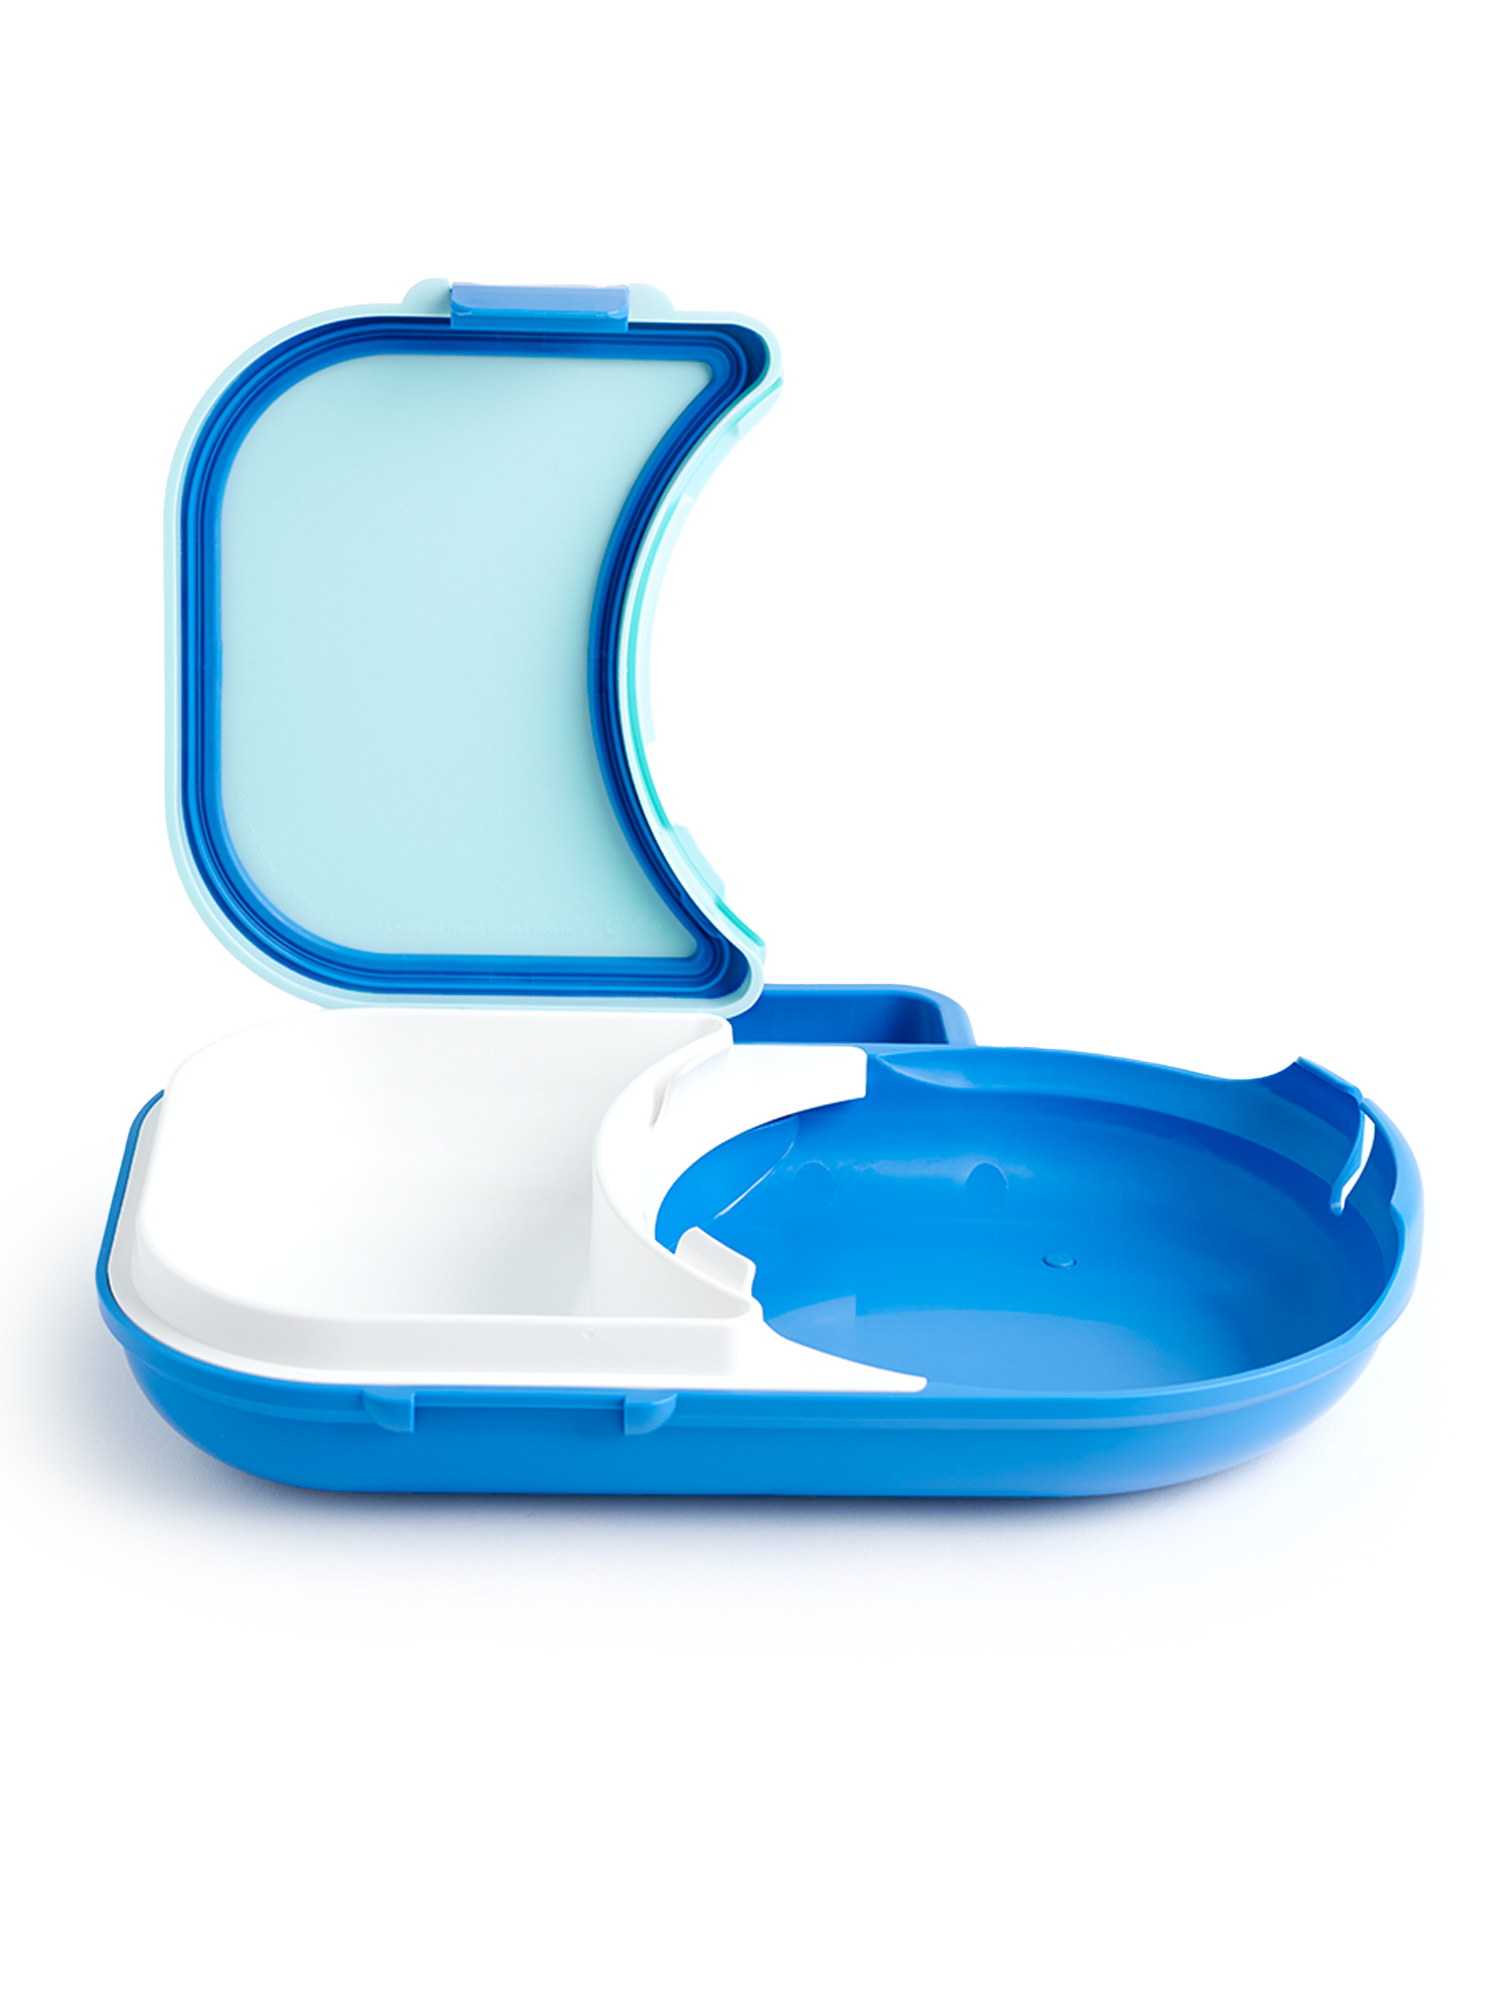 GoBe Snack Spinner- Macaron Blue – The Natural Baby Company